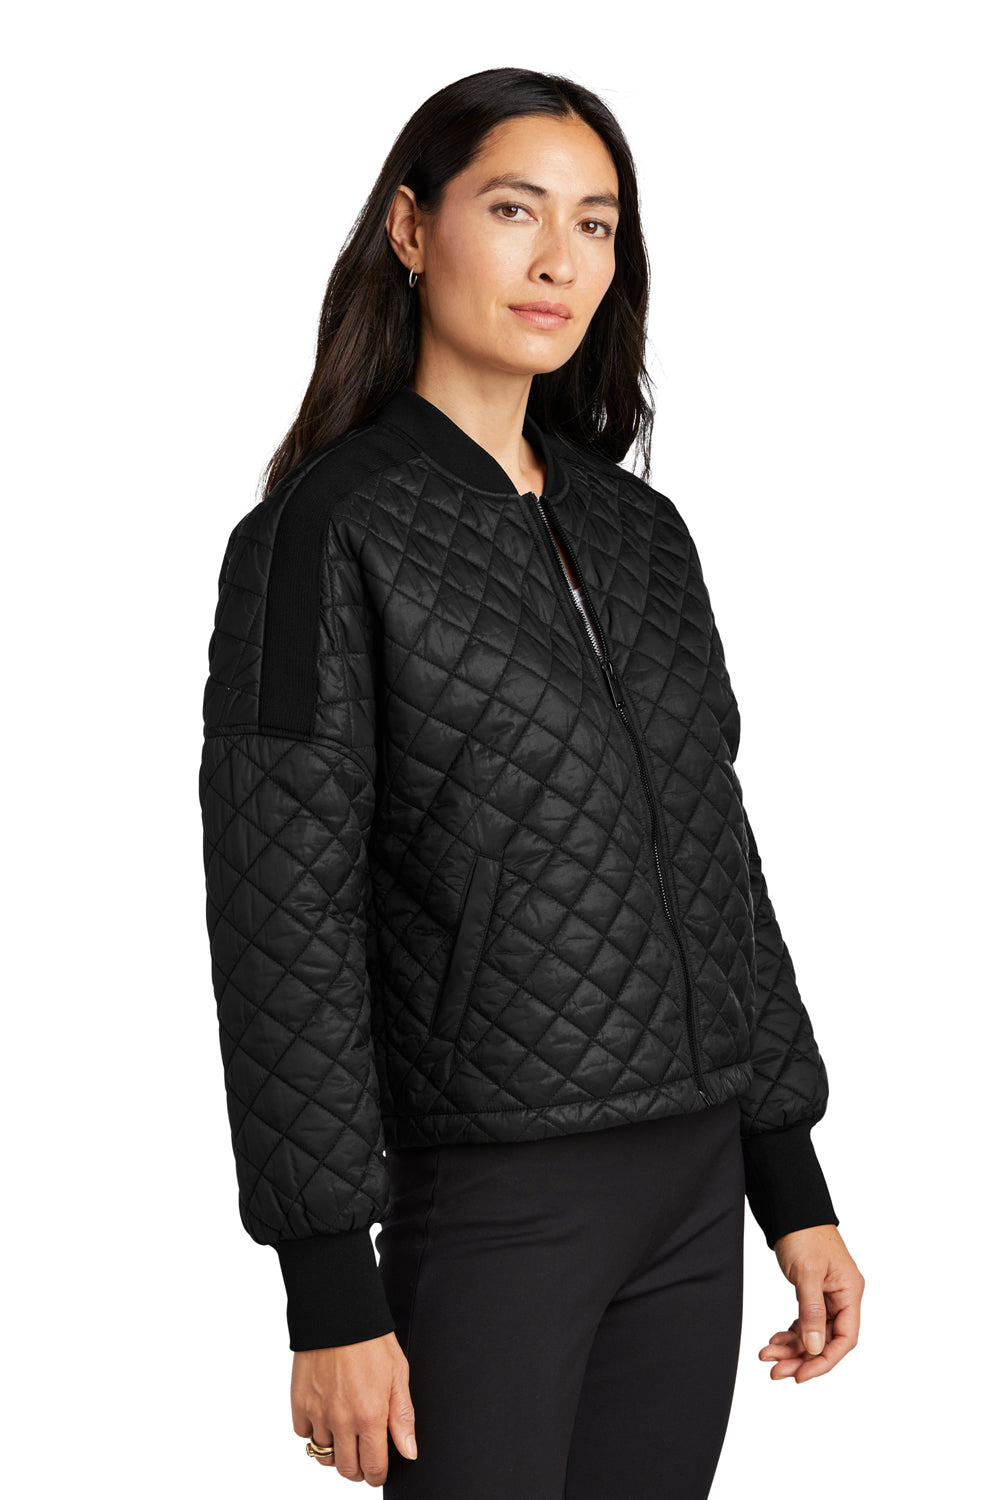 Mercer+Mettle Quilted Full-Zip Jacket, Product